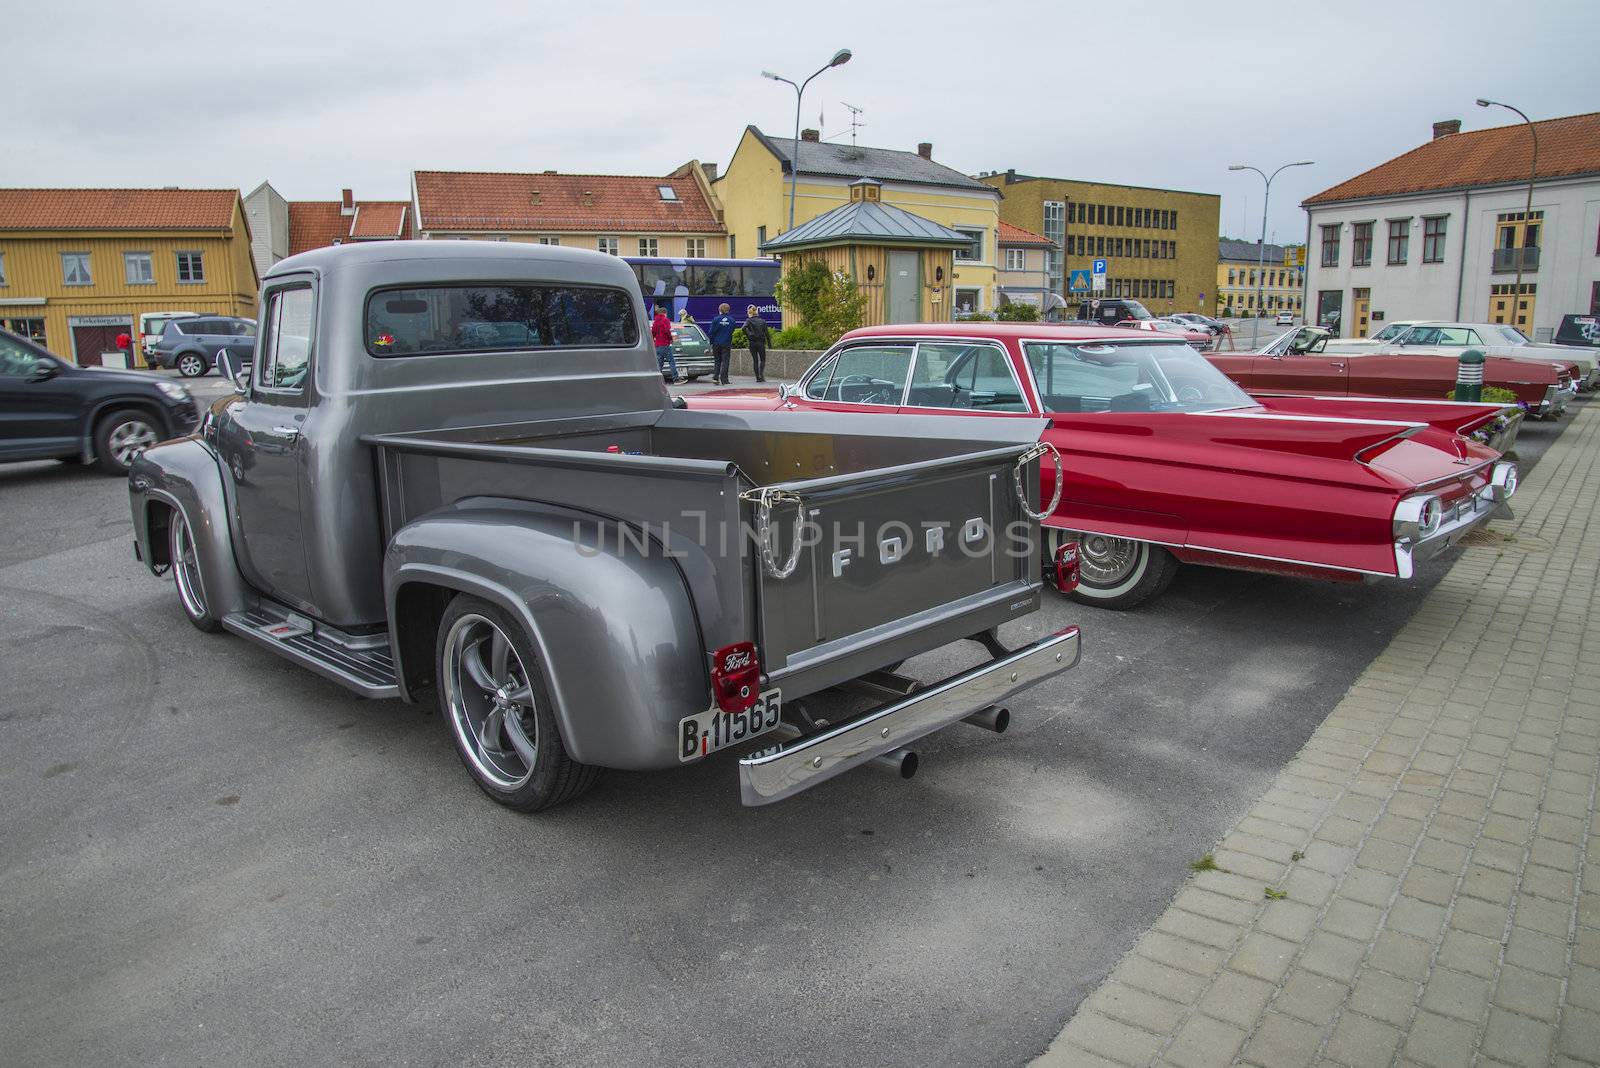 The image is shot at a fish-market in Halden, Norway where there every Wednesday during the summer months are held classic American car show.